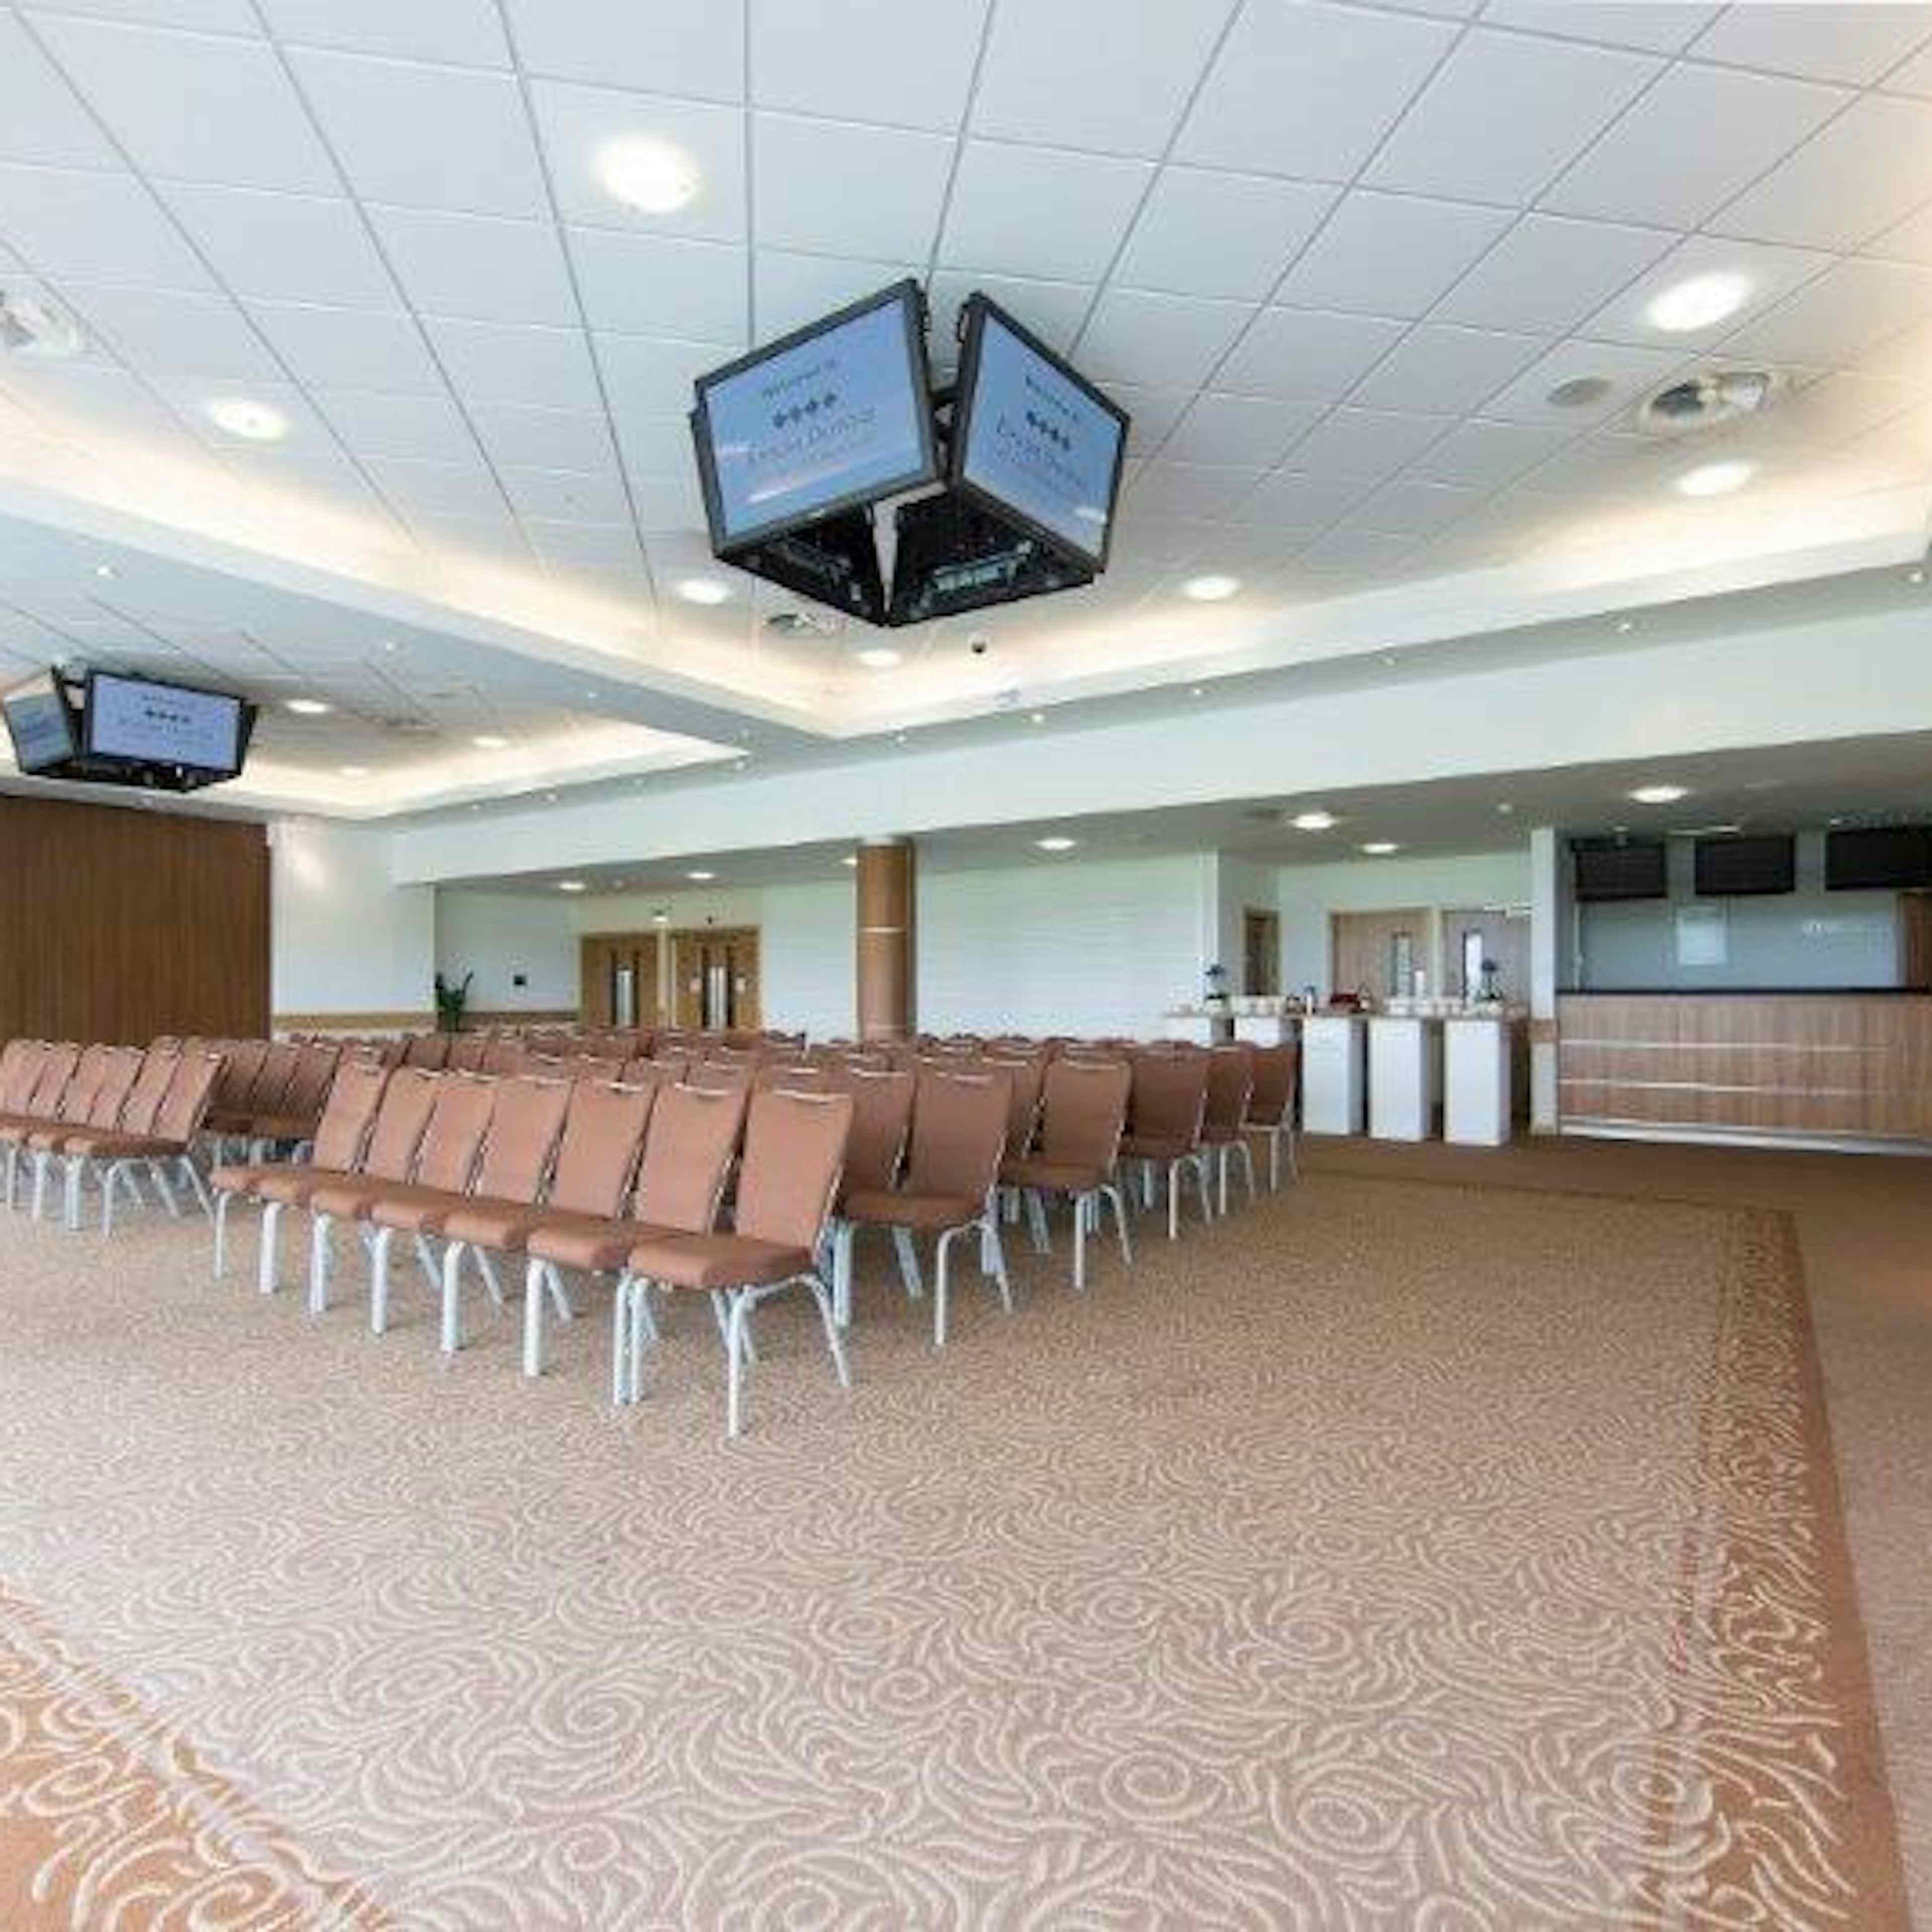 Epsom Downs Racecourse - The Gallops Suite image 2